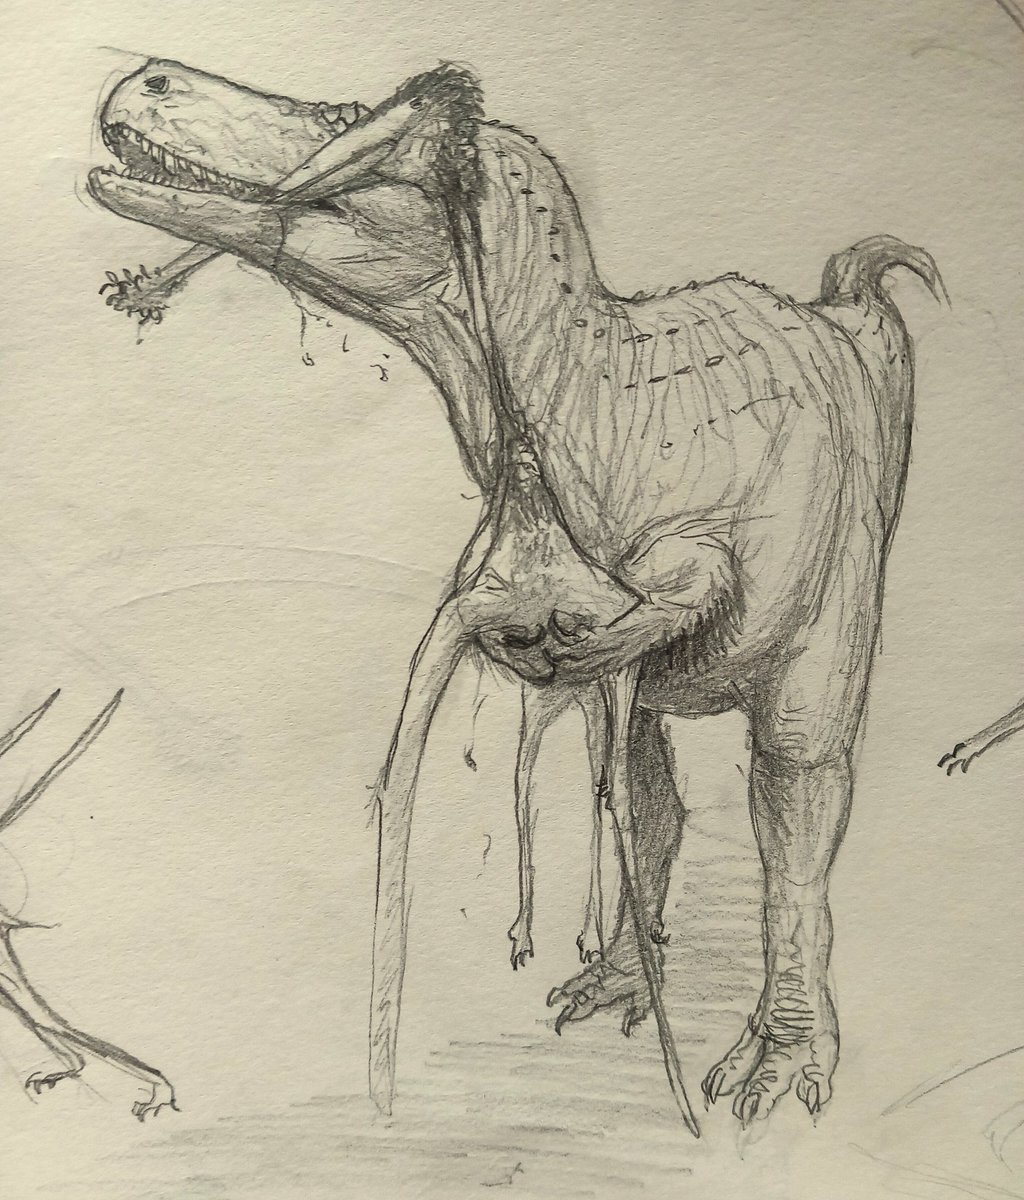 A large Lusognathus almadrava serves as a tasty snack for this hungry Torvosaurus gurneyi